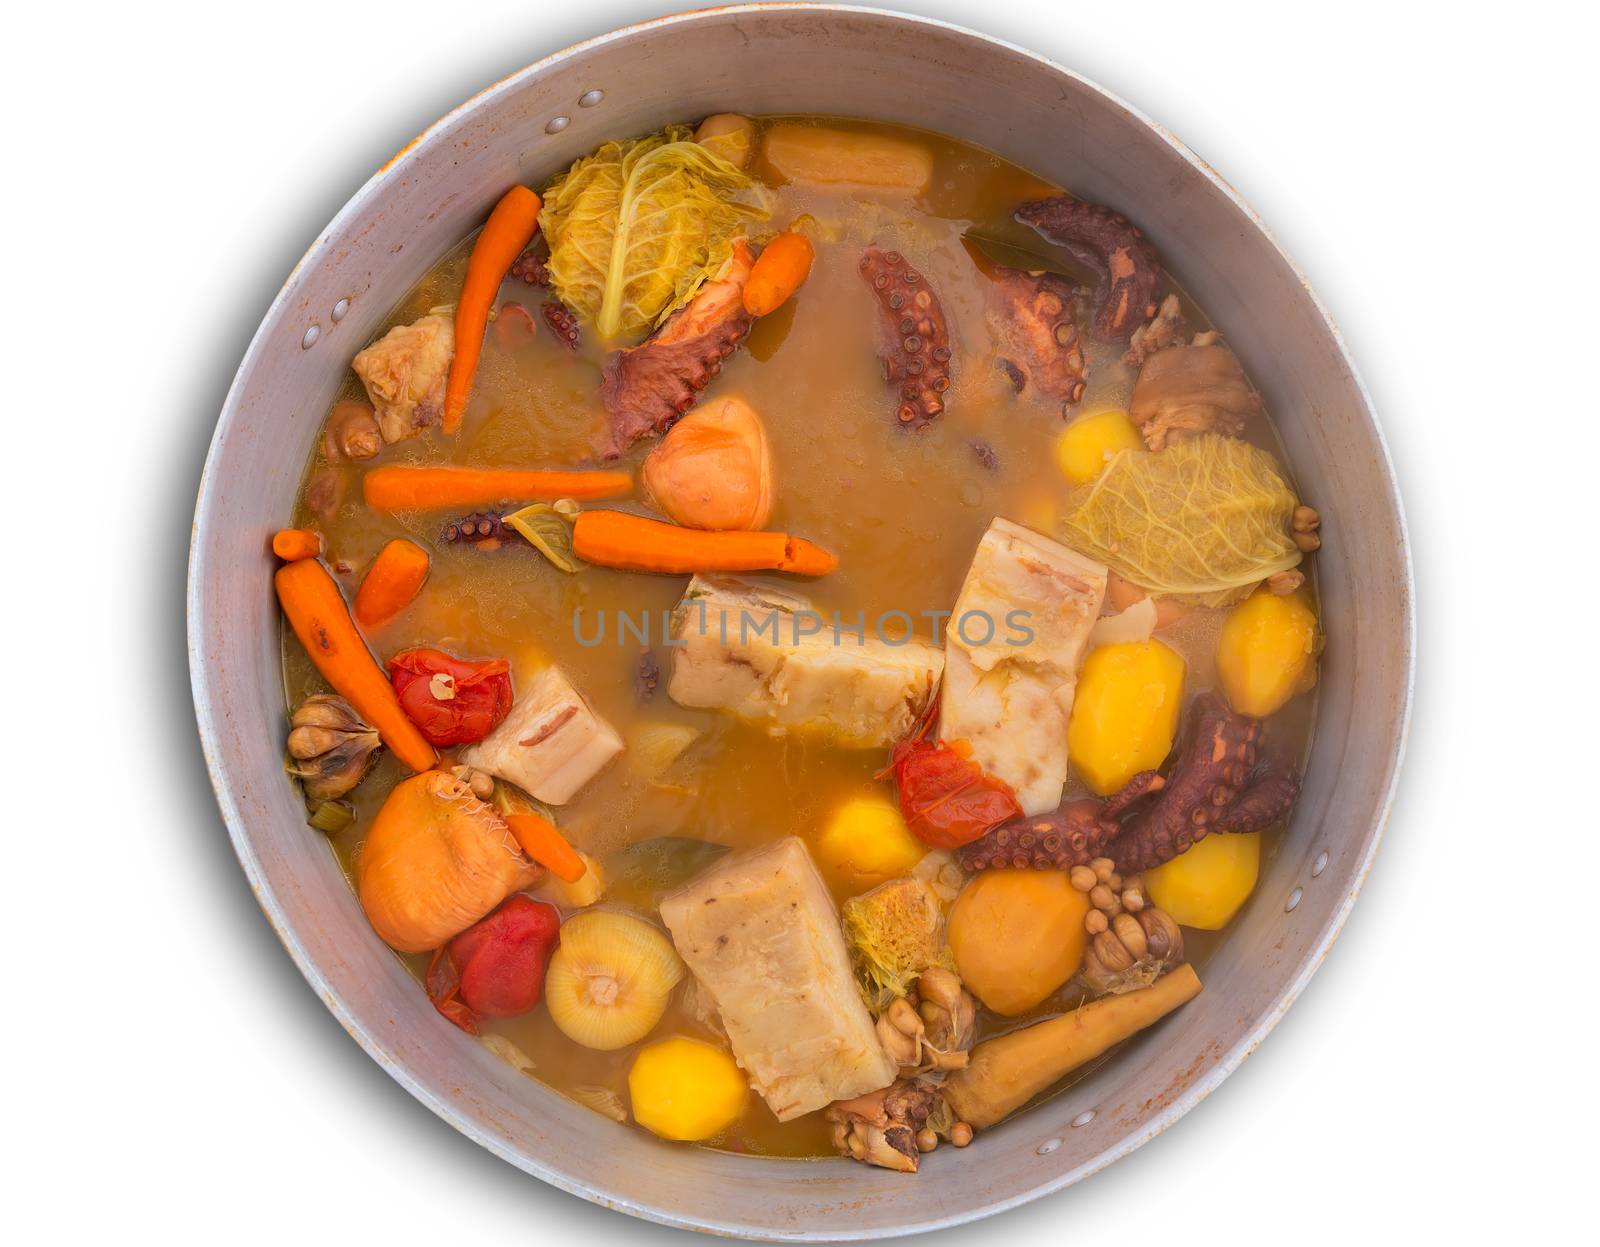 Octopus stew from mediterranean traditional recipe in Alicante spain